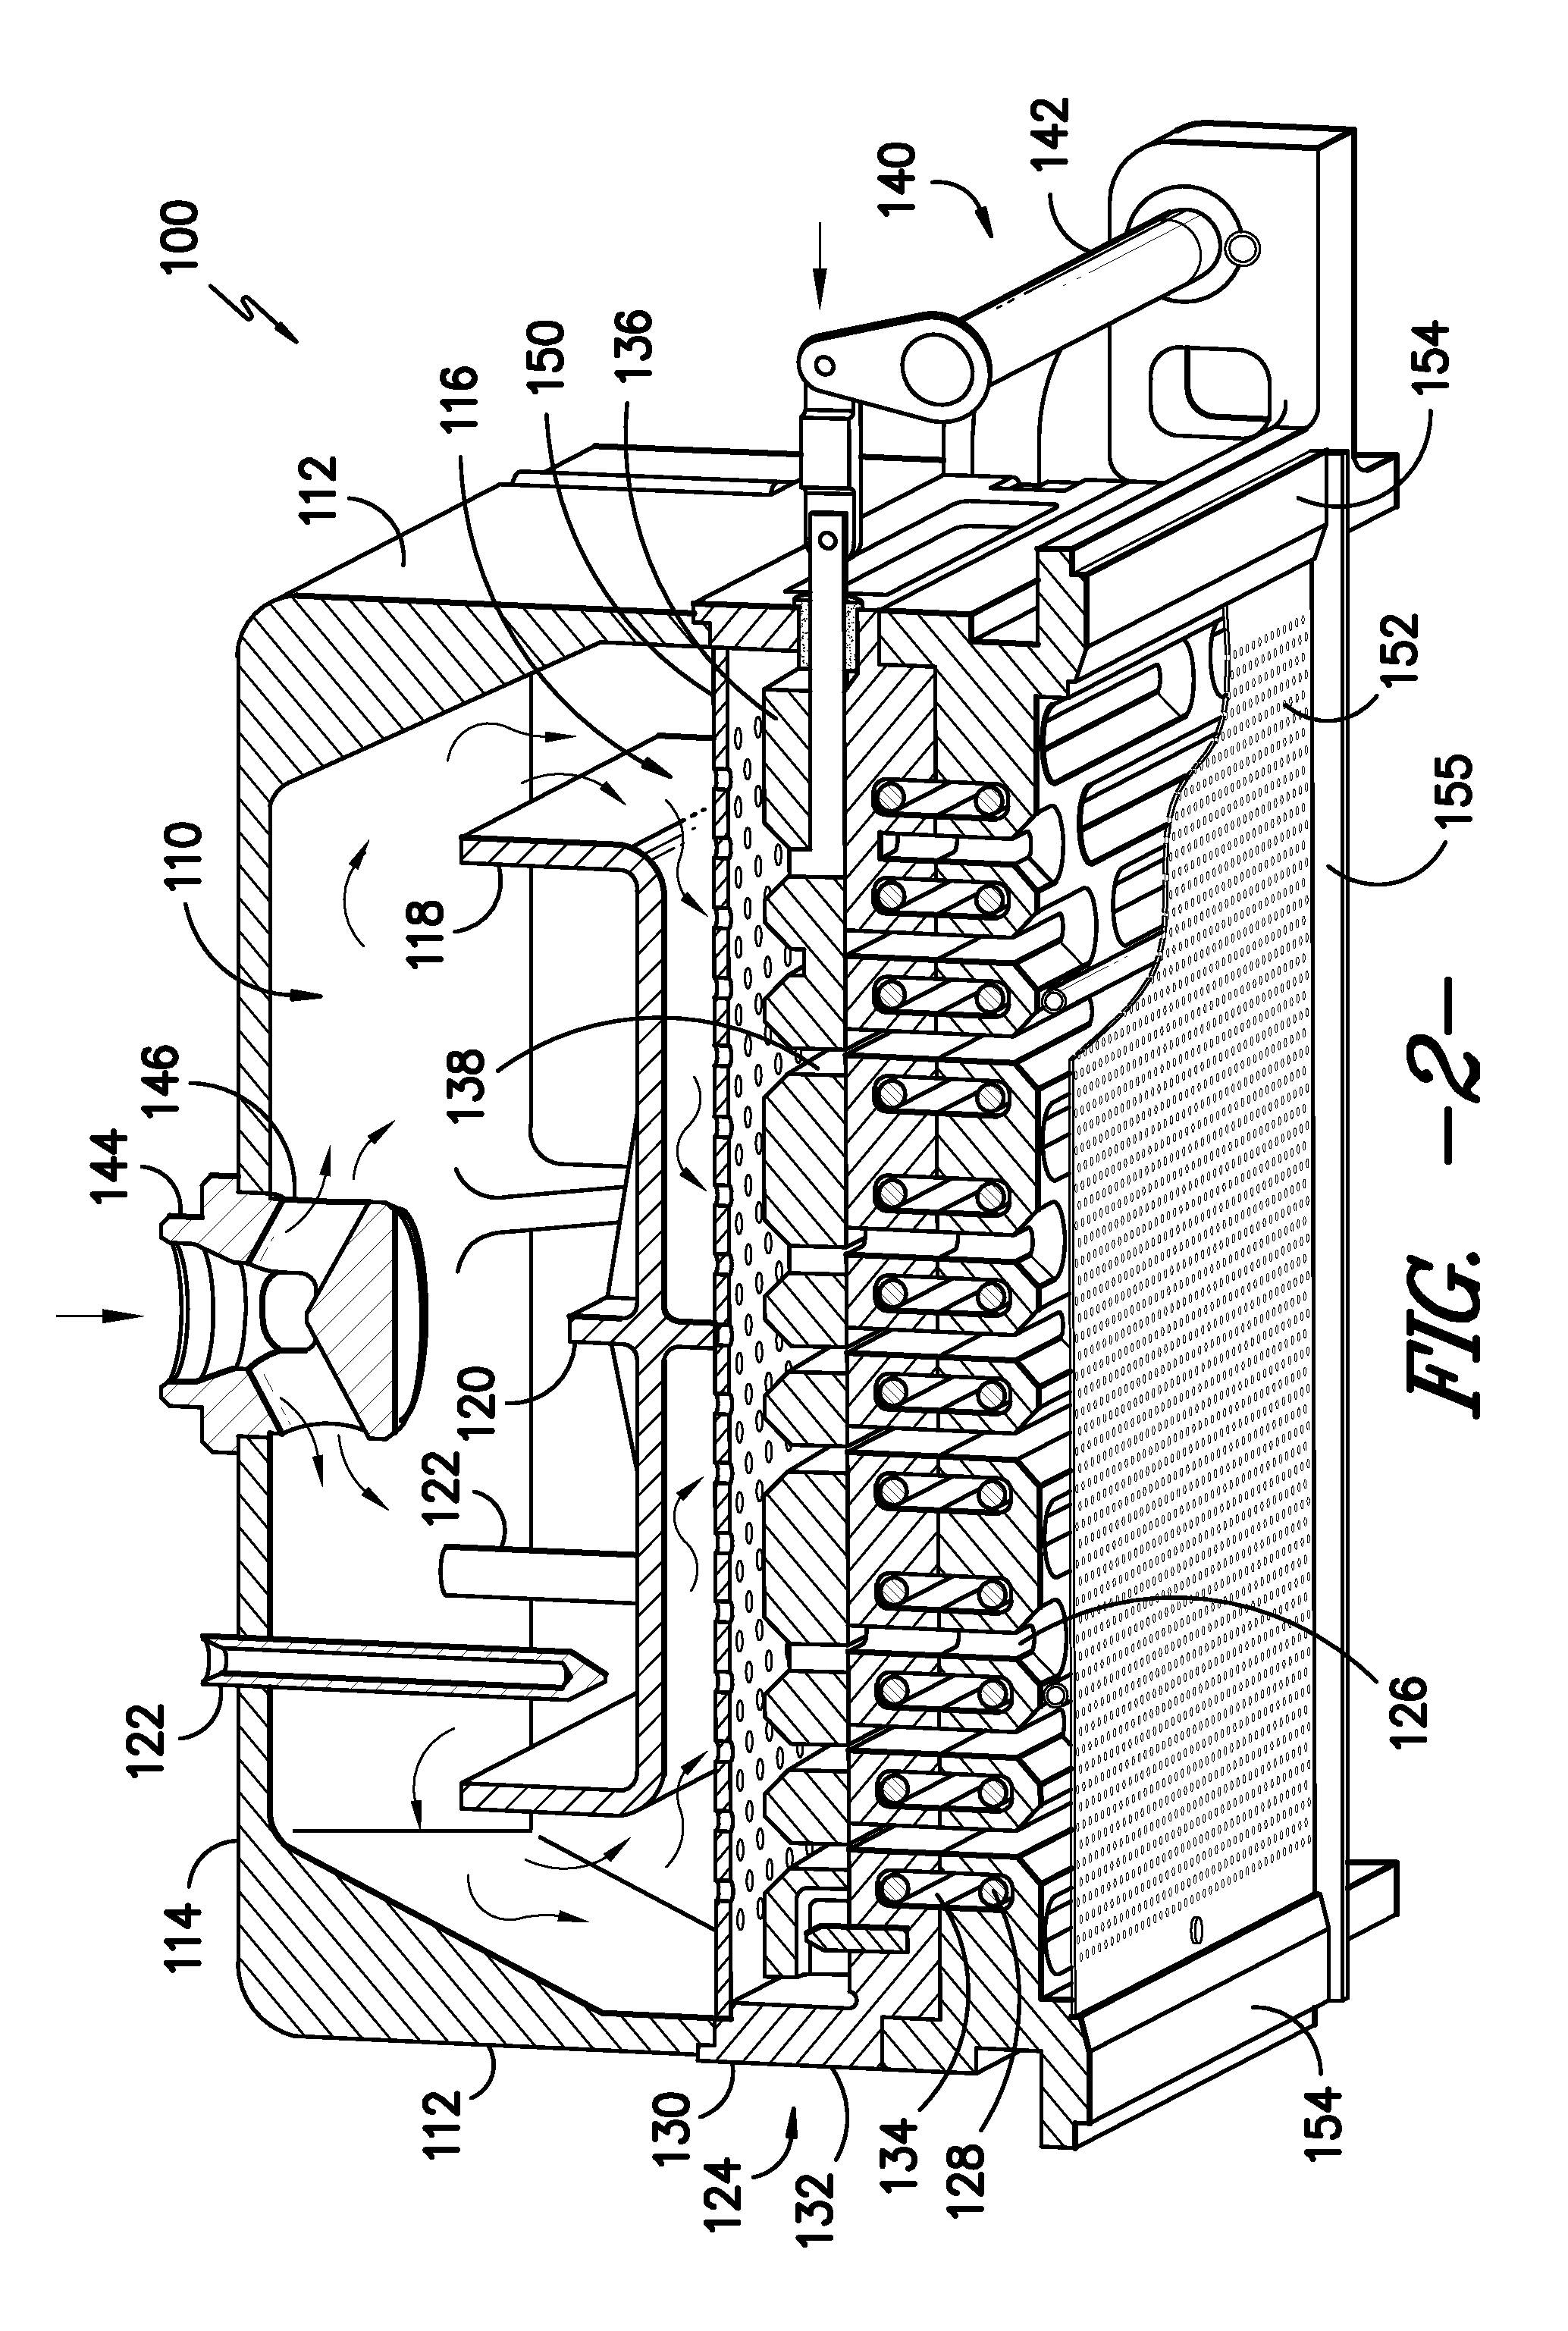 High emissivity distribution plate in vapor deposition apparatus and processes